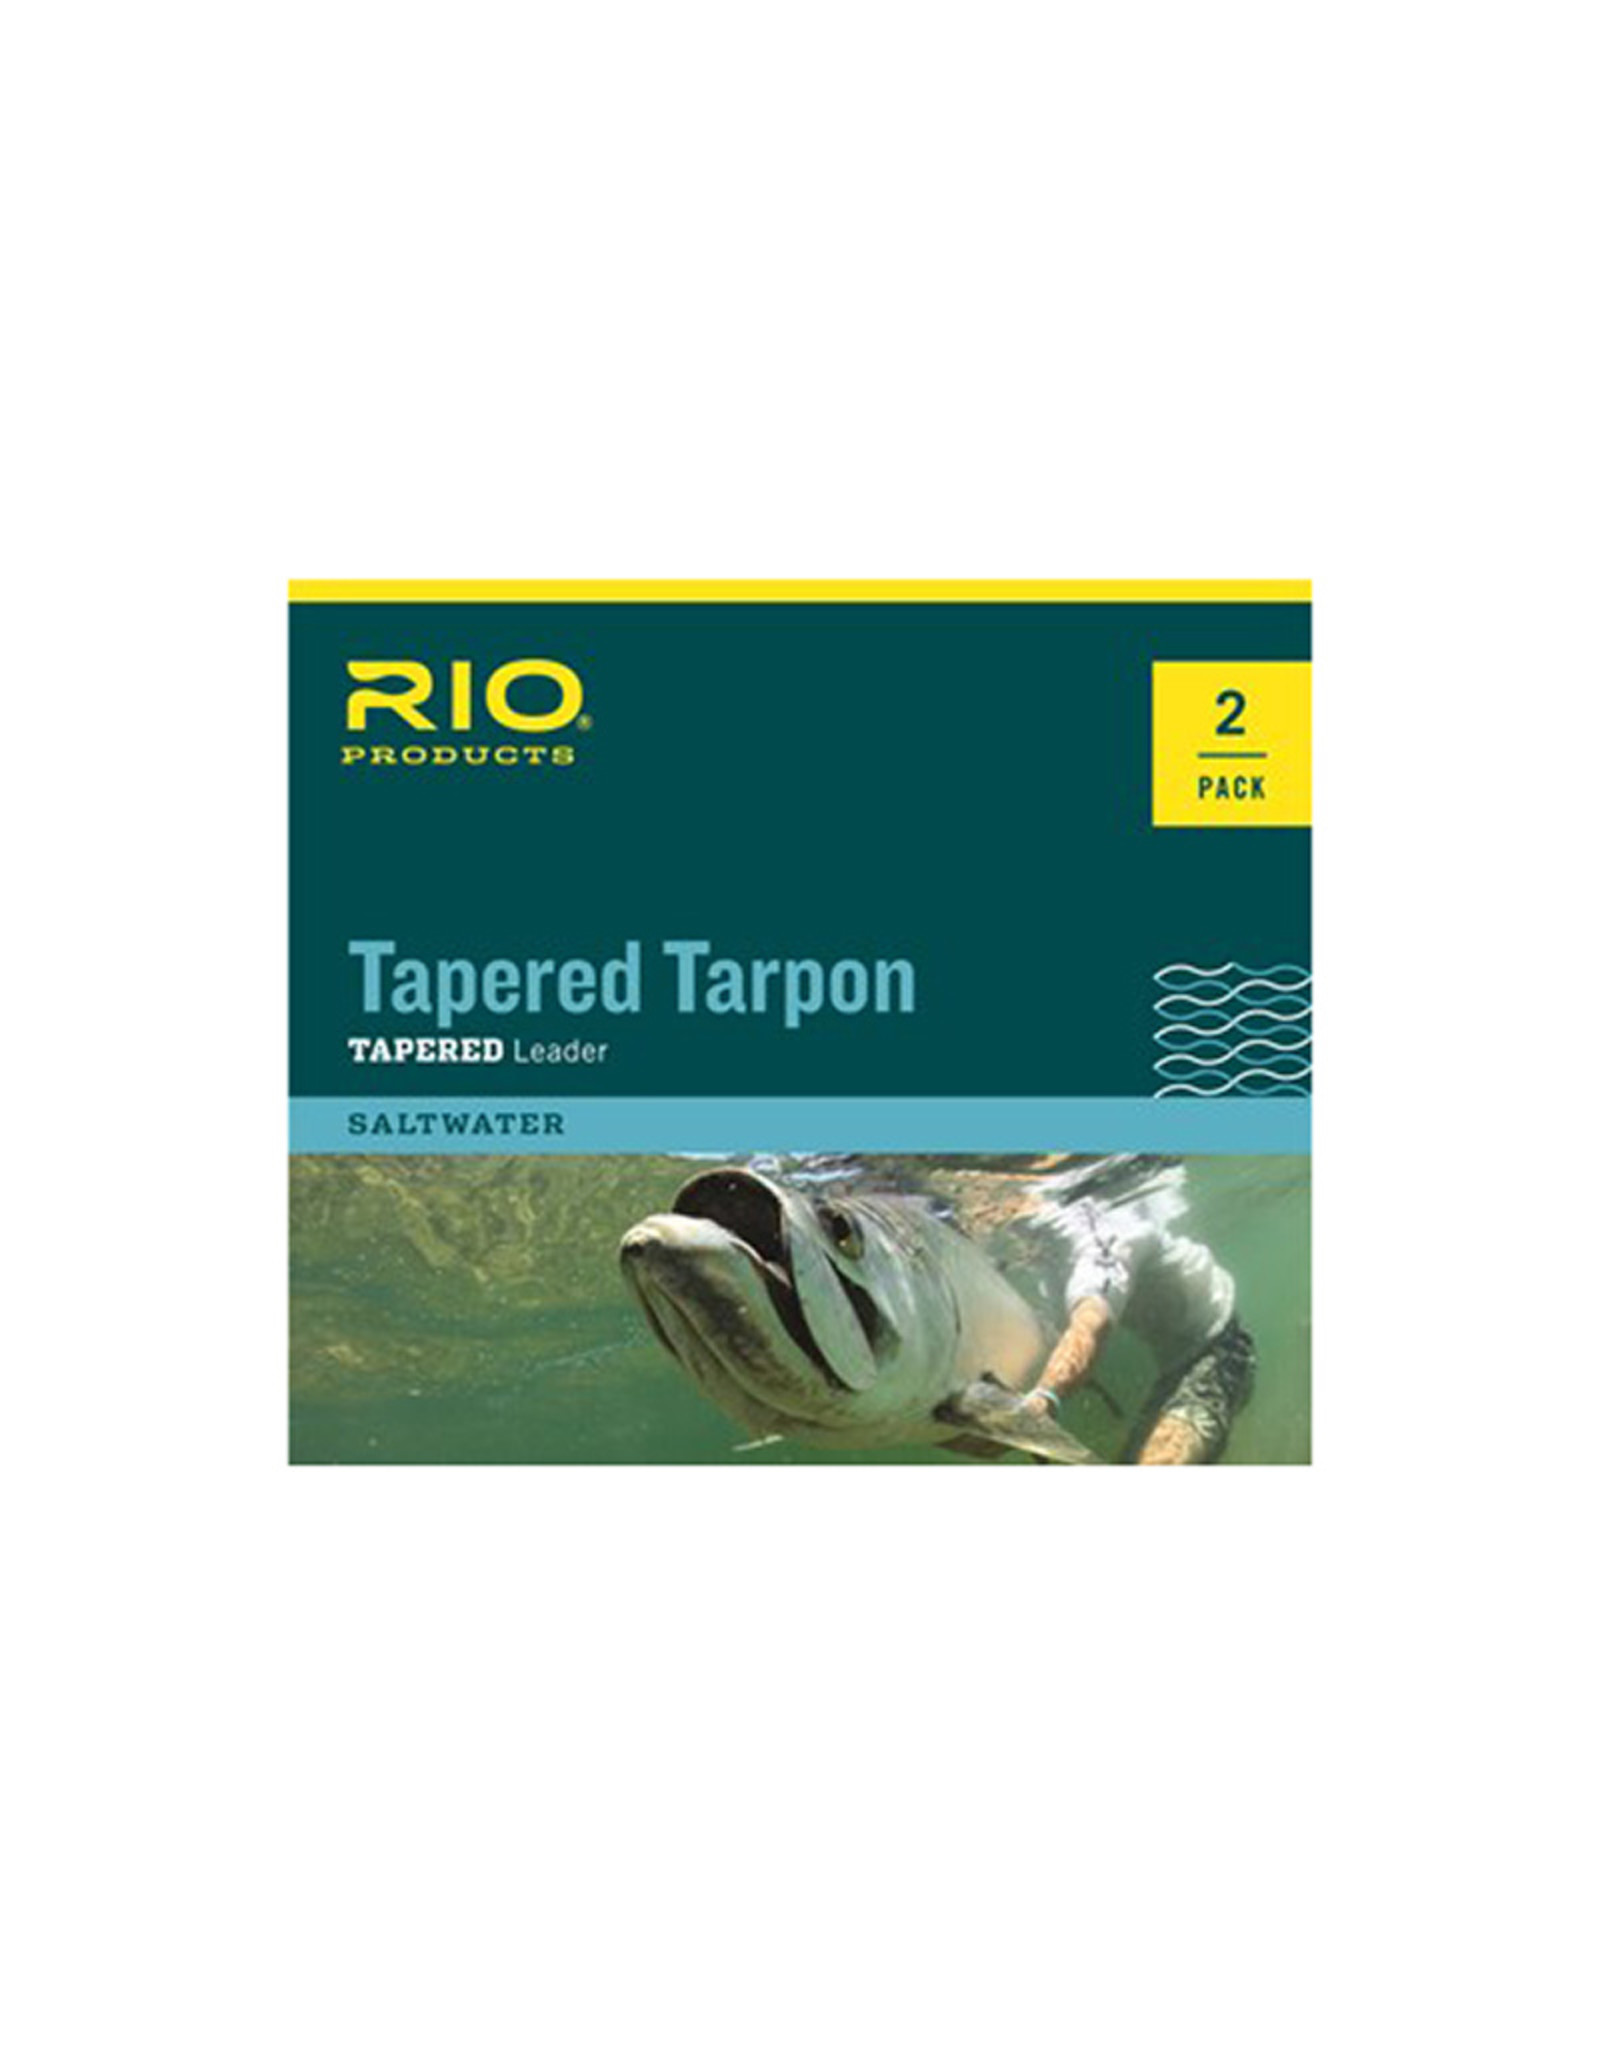 RIO Products Tapered Tarpon 12ft Leader: 2 Pack